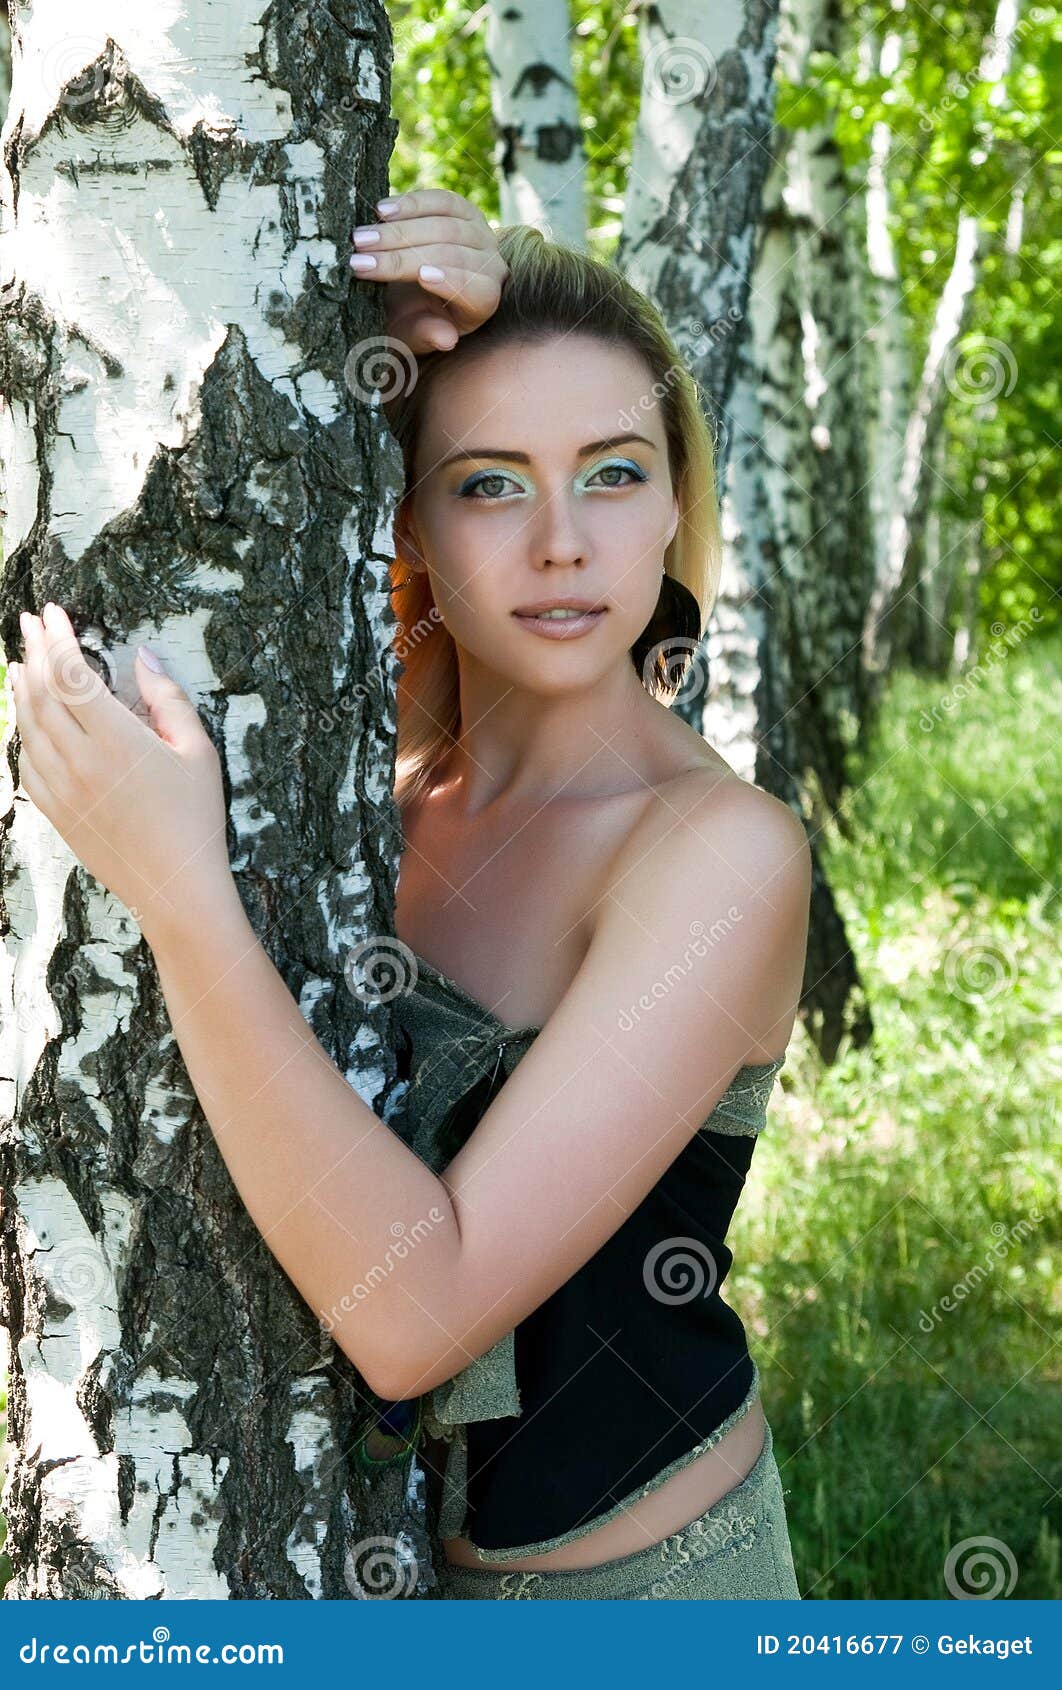 Girl on nature portrait stock image. Image of attractive - 20416677